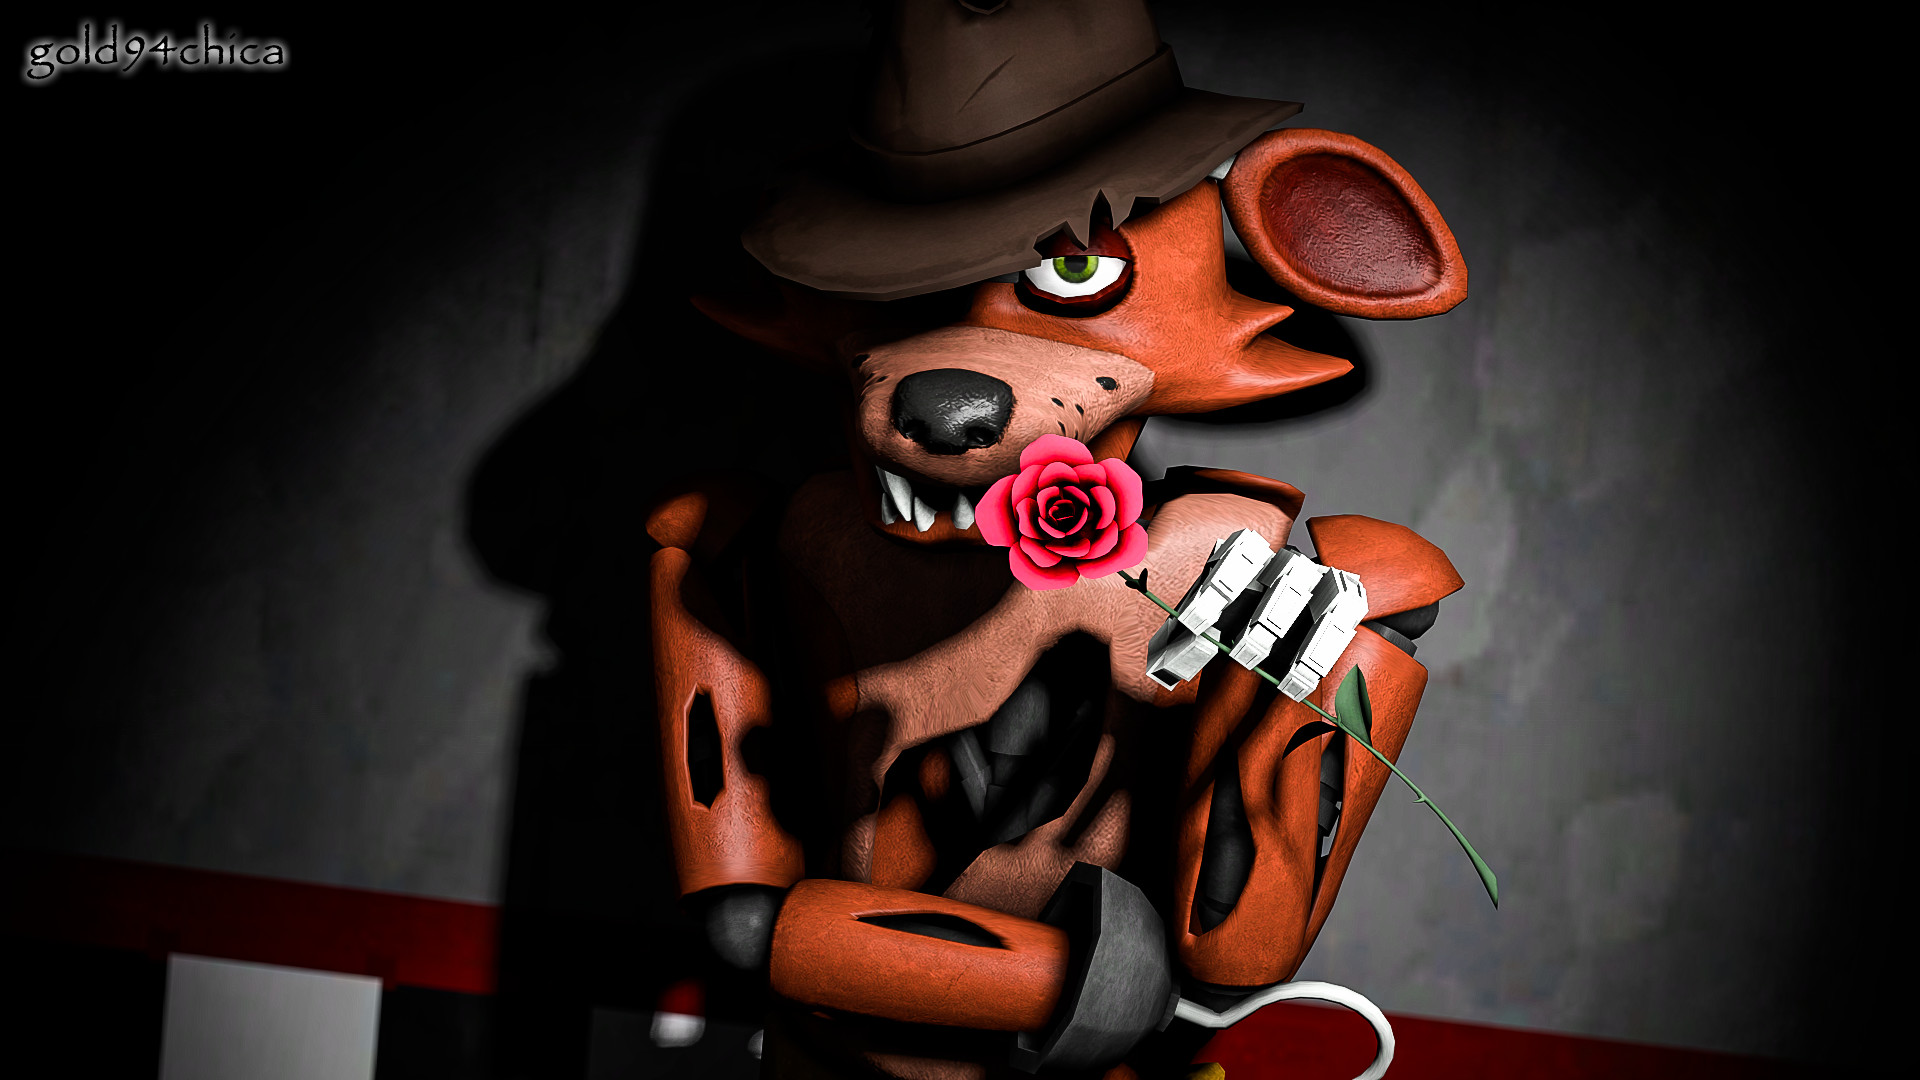 1920x1080 gold94chica 1,495 527 Oh, I've been waiting for you (Foxy SFM Wallpaper) by  gold94chica